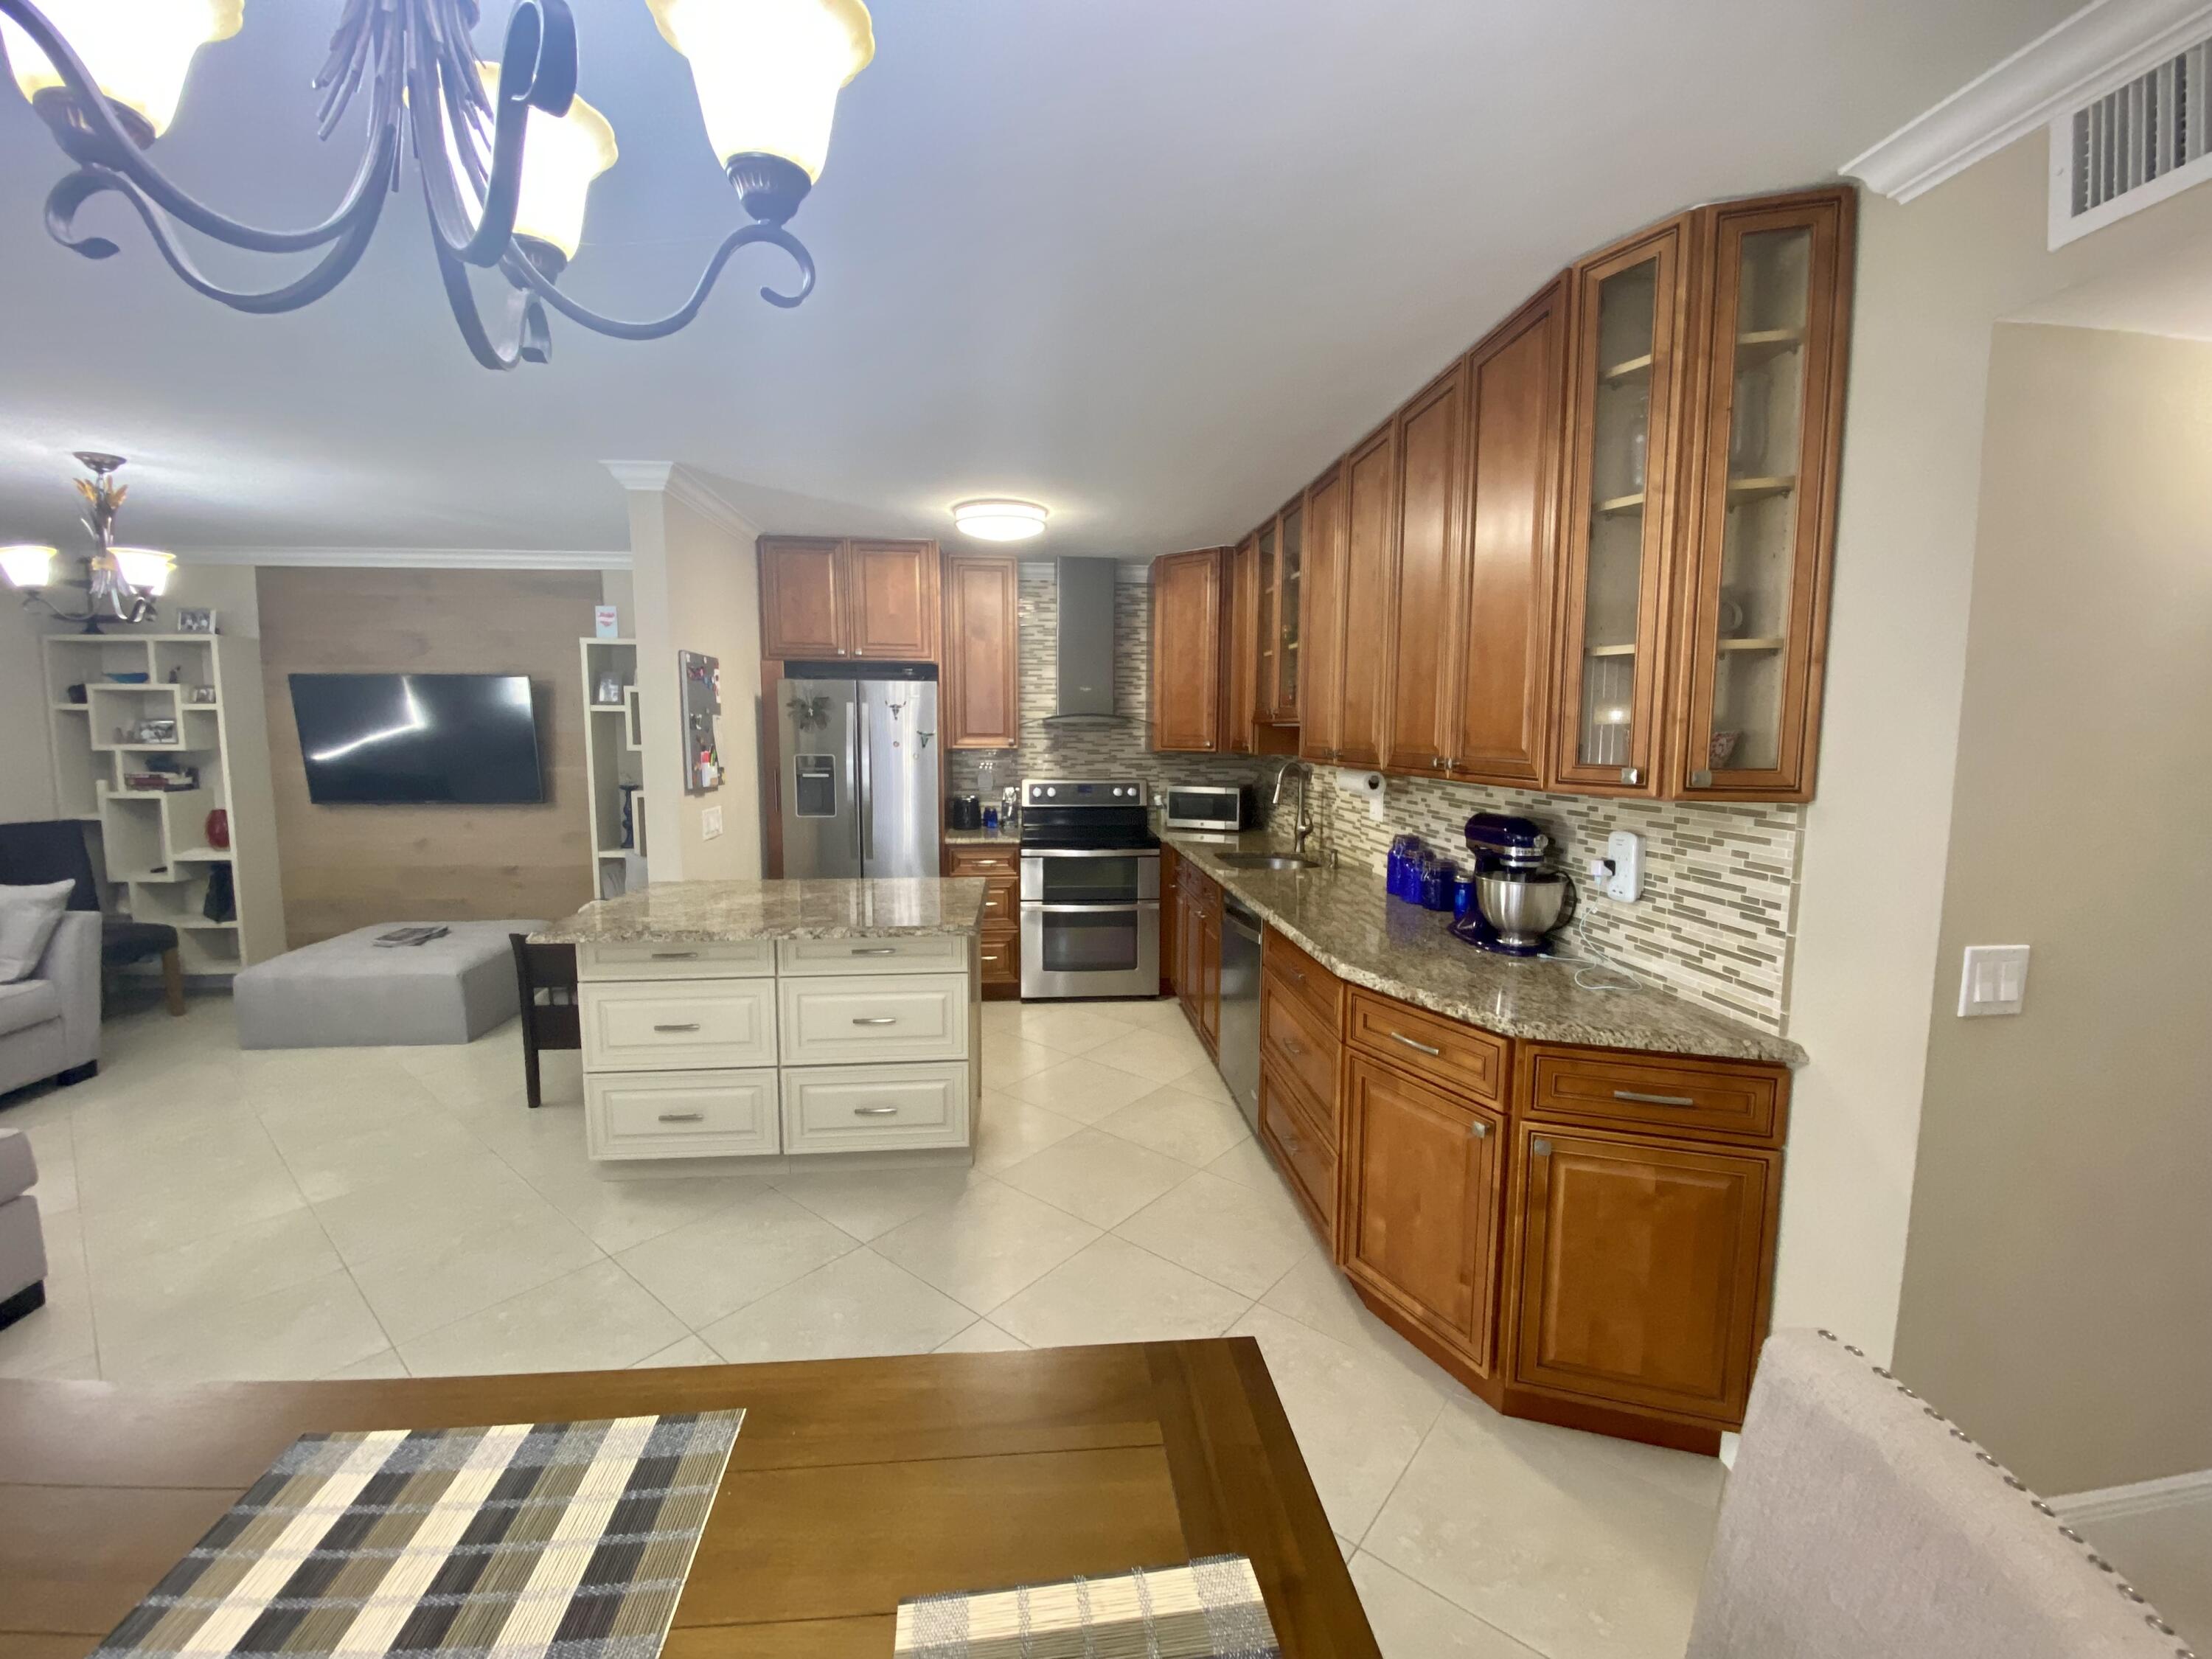 a large open kitchen with stainless steel appliances kitchen island granite countertop a stove and white cabinets